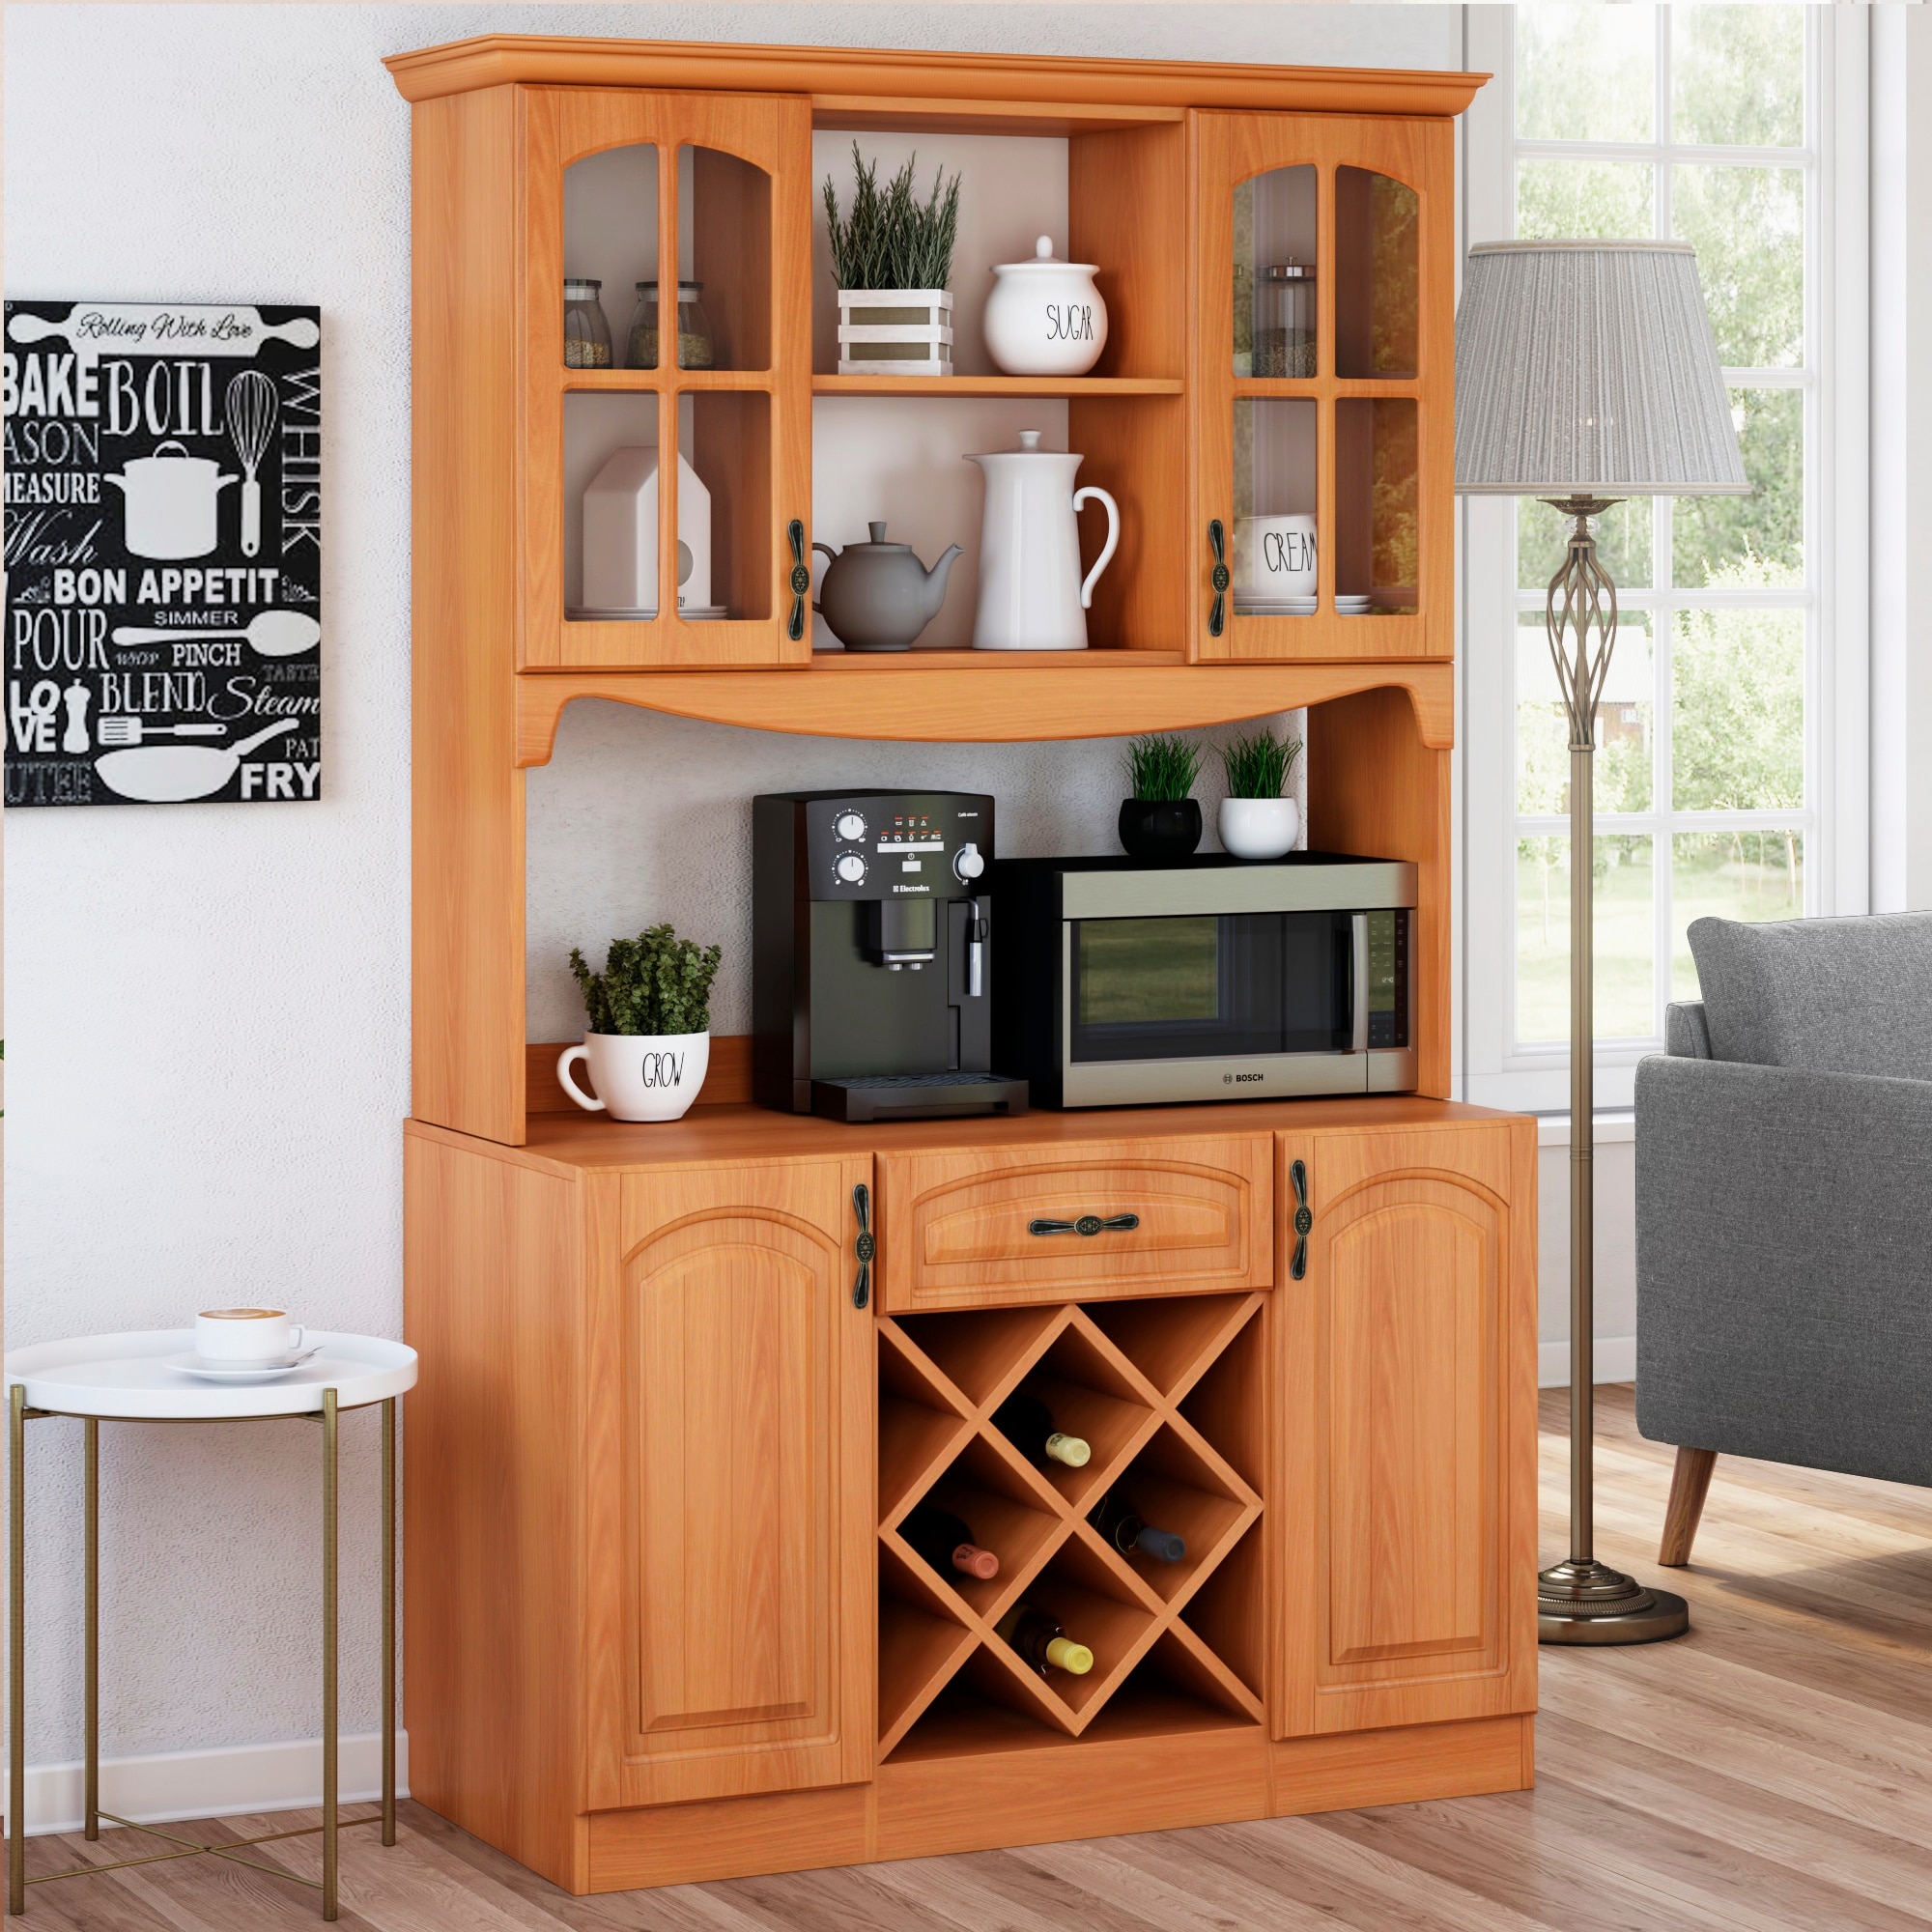 https://ak1.ostkcdn.com/images/products/is/images/direct/44b26734ff3343acbdc10d06bdff0fb44f3aff6a/Living-Skog-Pantry-Kitchen-Storage-Cabinet-Wine-Buffet-MDF-Cherry.jpg